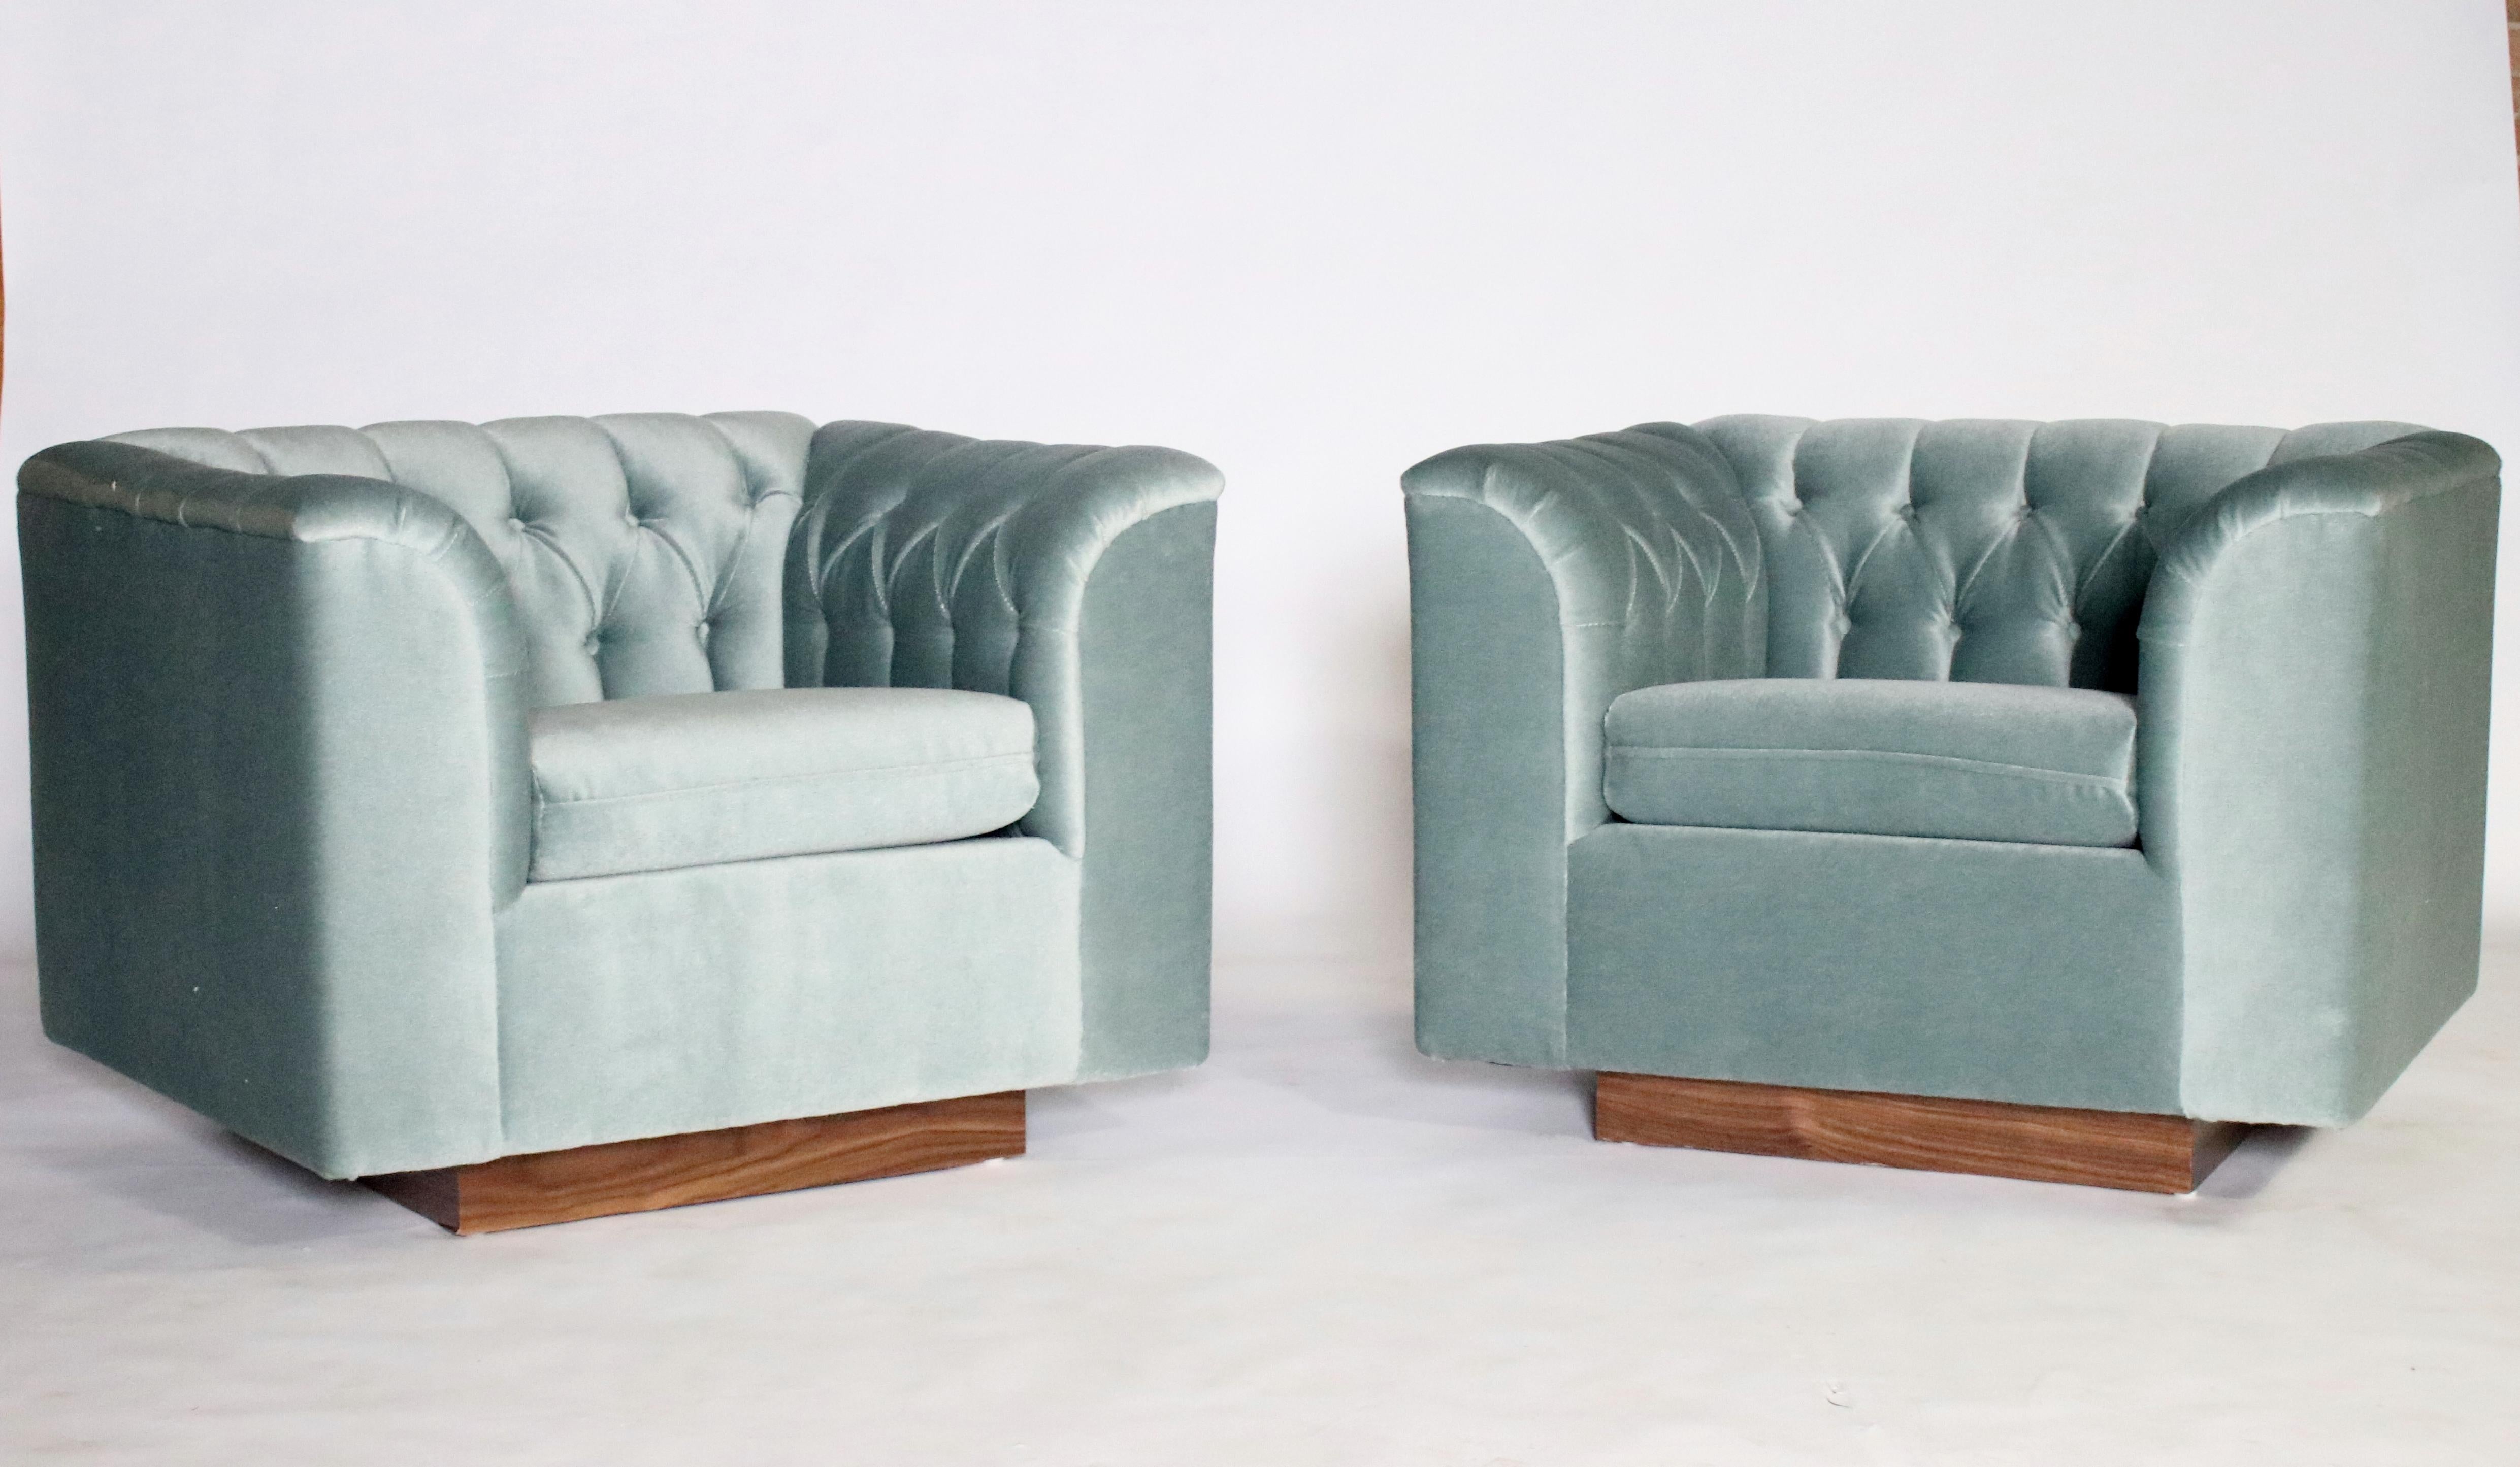 Pair of Ward Bennett cube shaped club chairs on walnut plinths newly upholstered in steel blue gray tufted mohair.